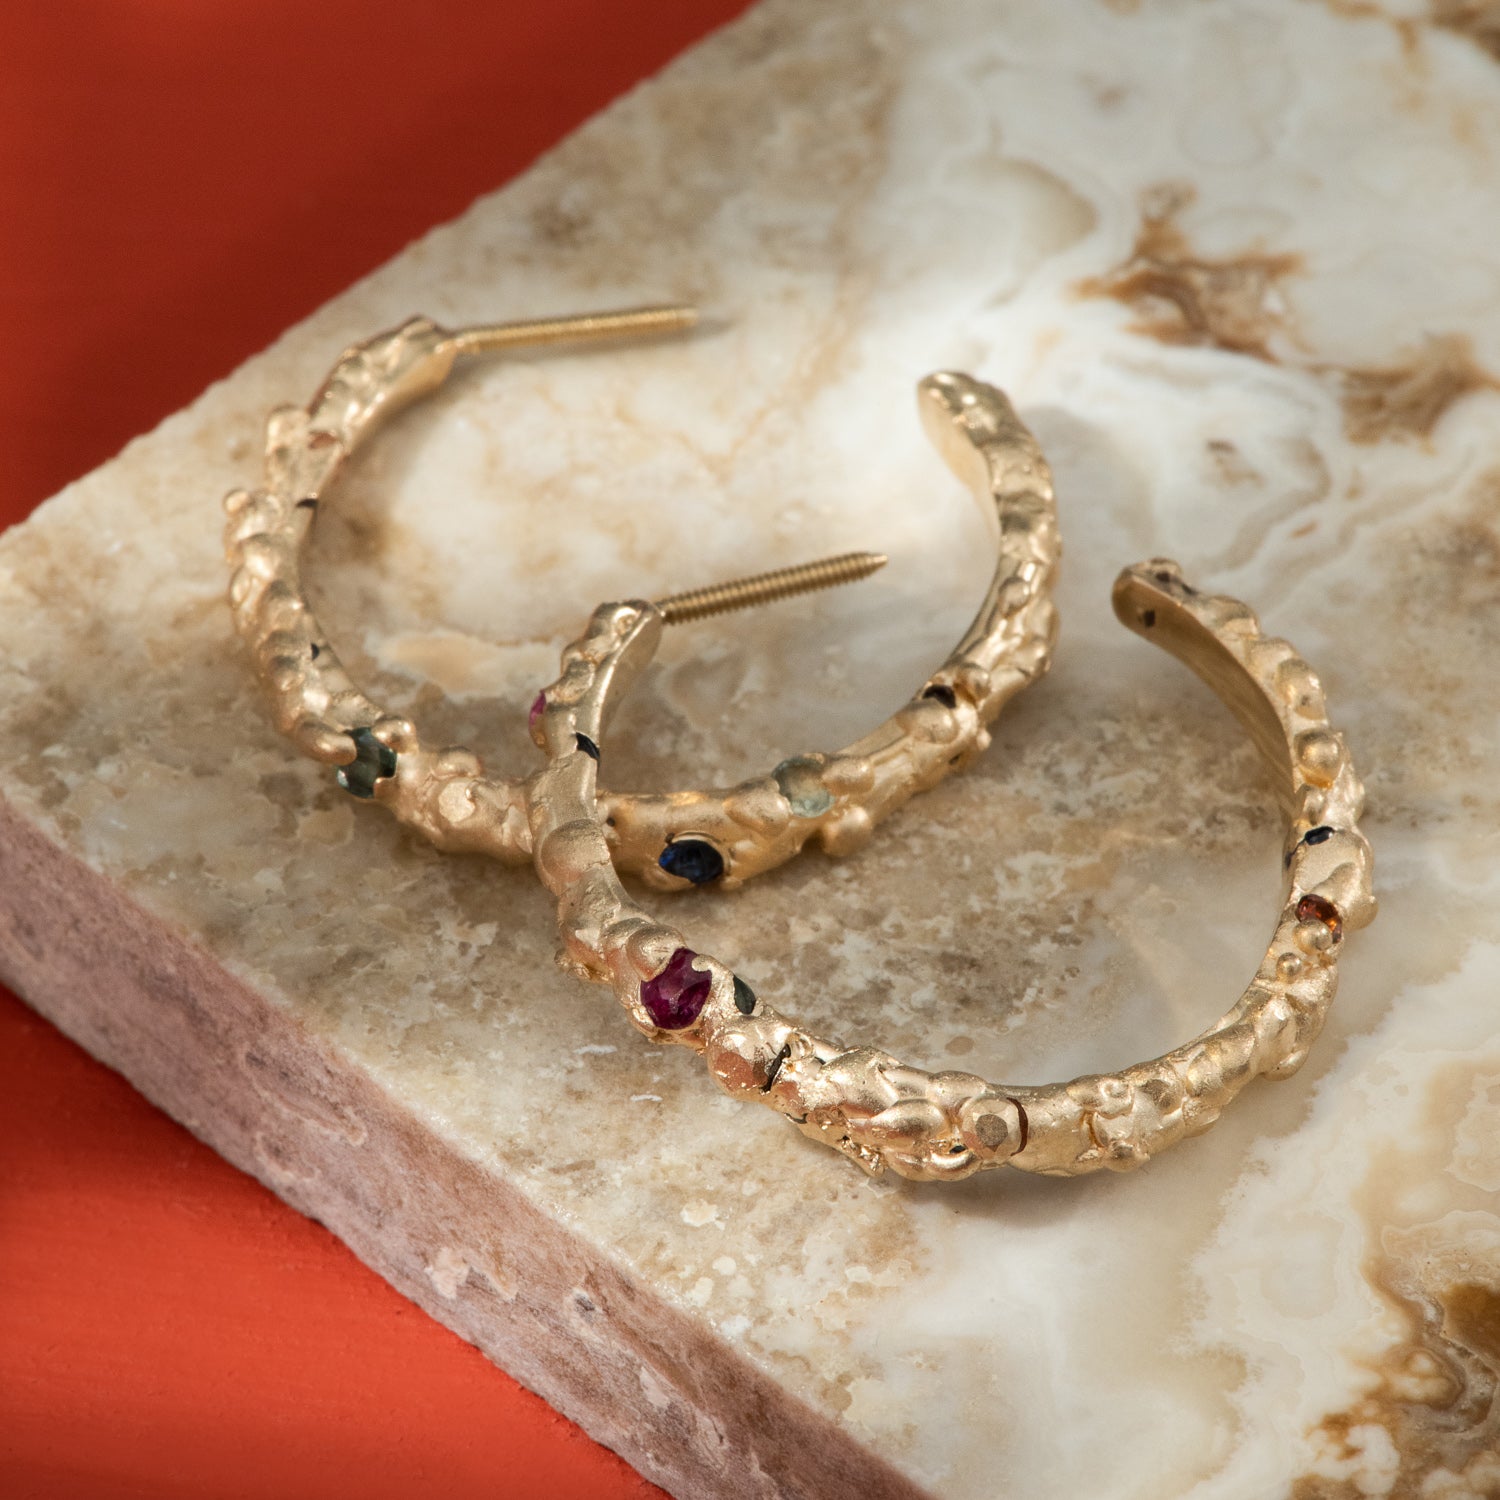 Many shades of sapphires organically flush set in satin finished gold hoops, with a bubbling texture.